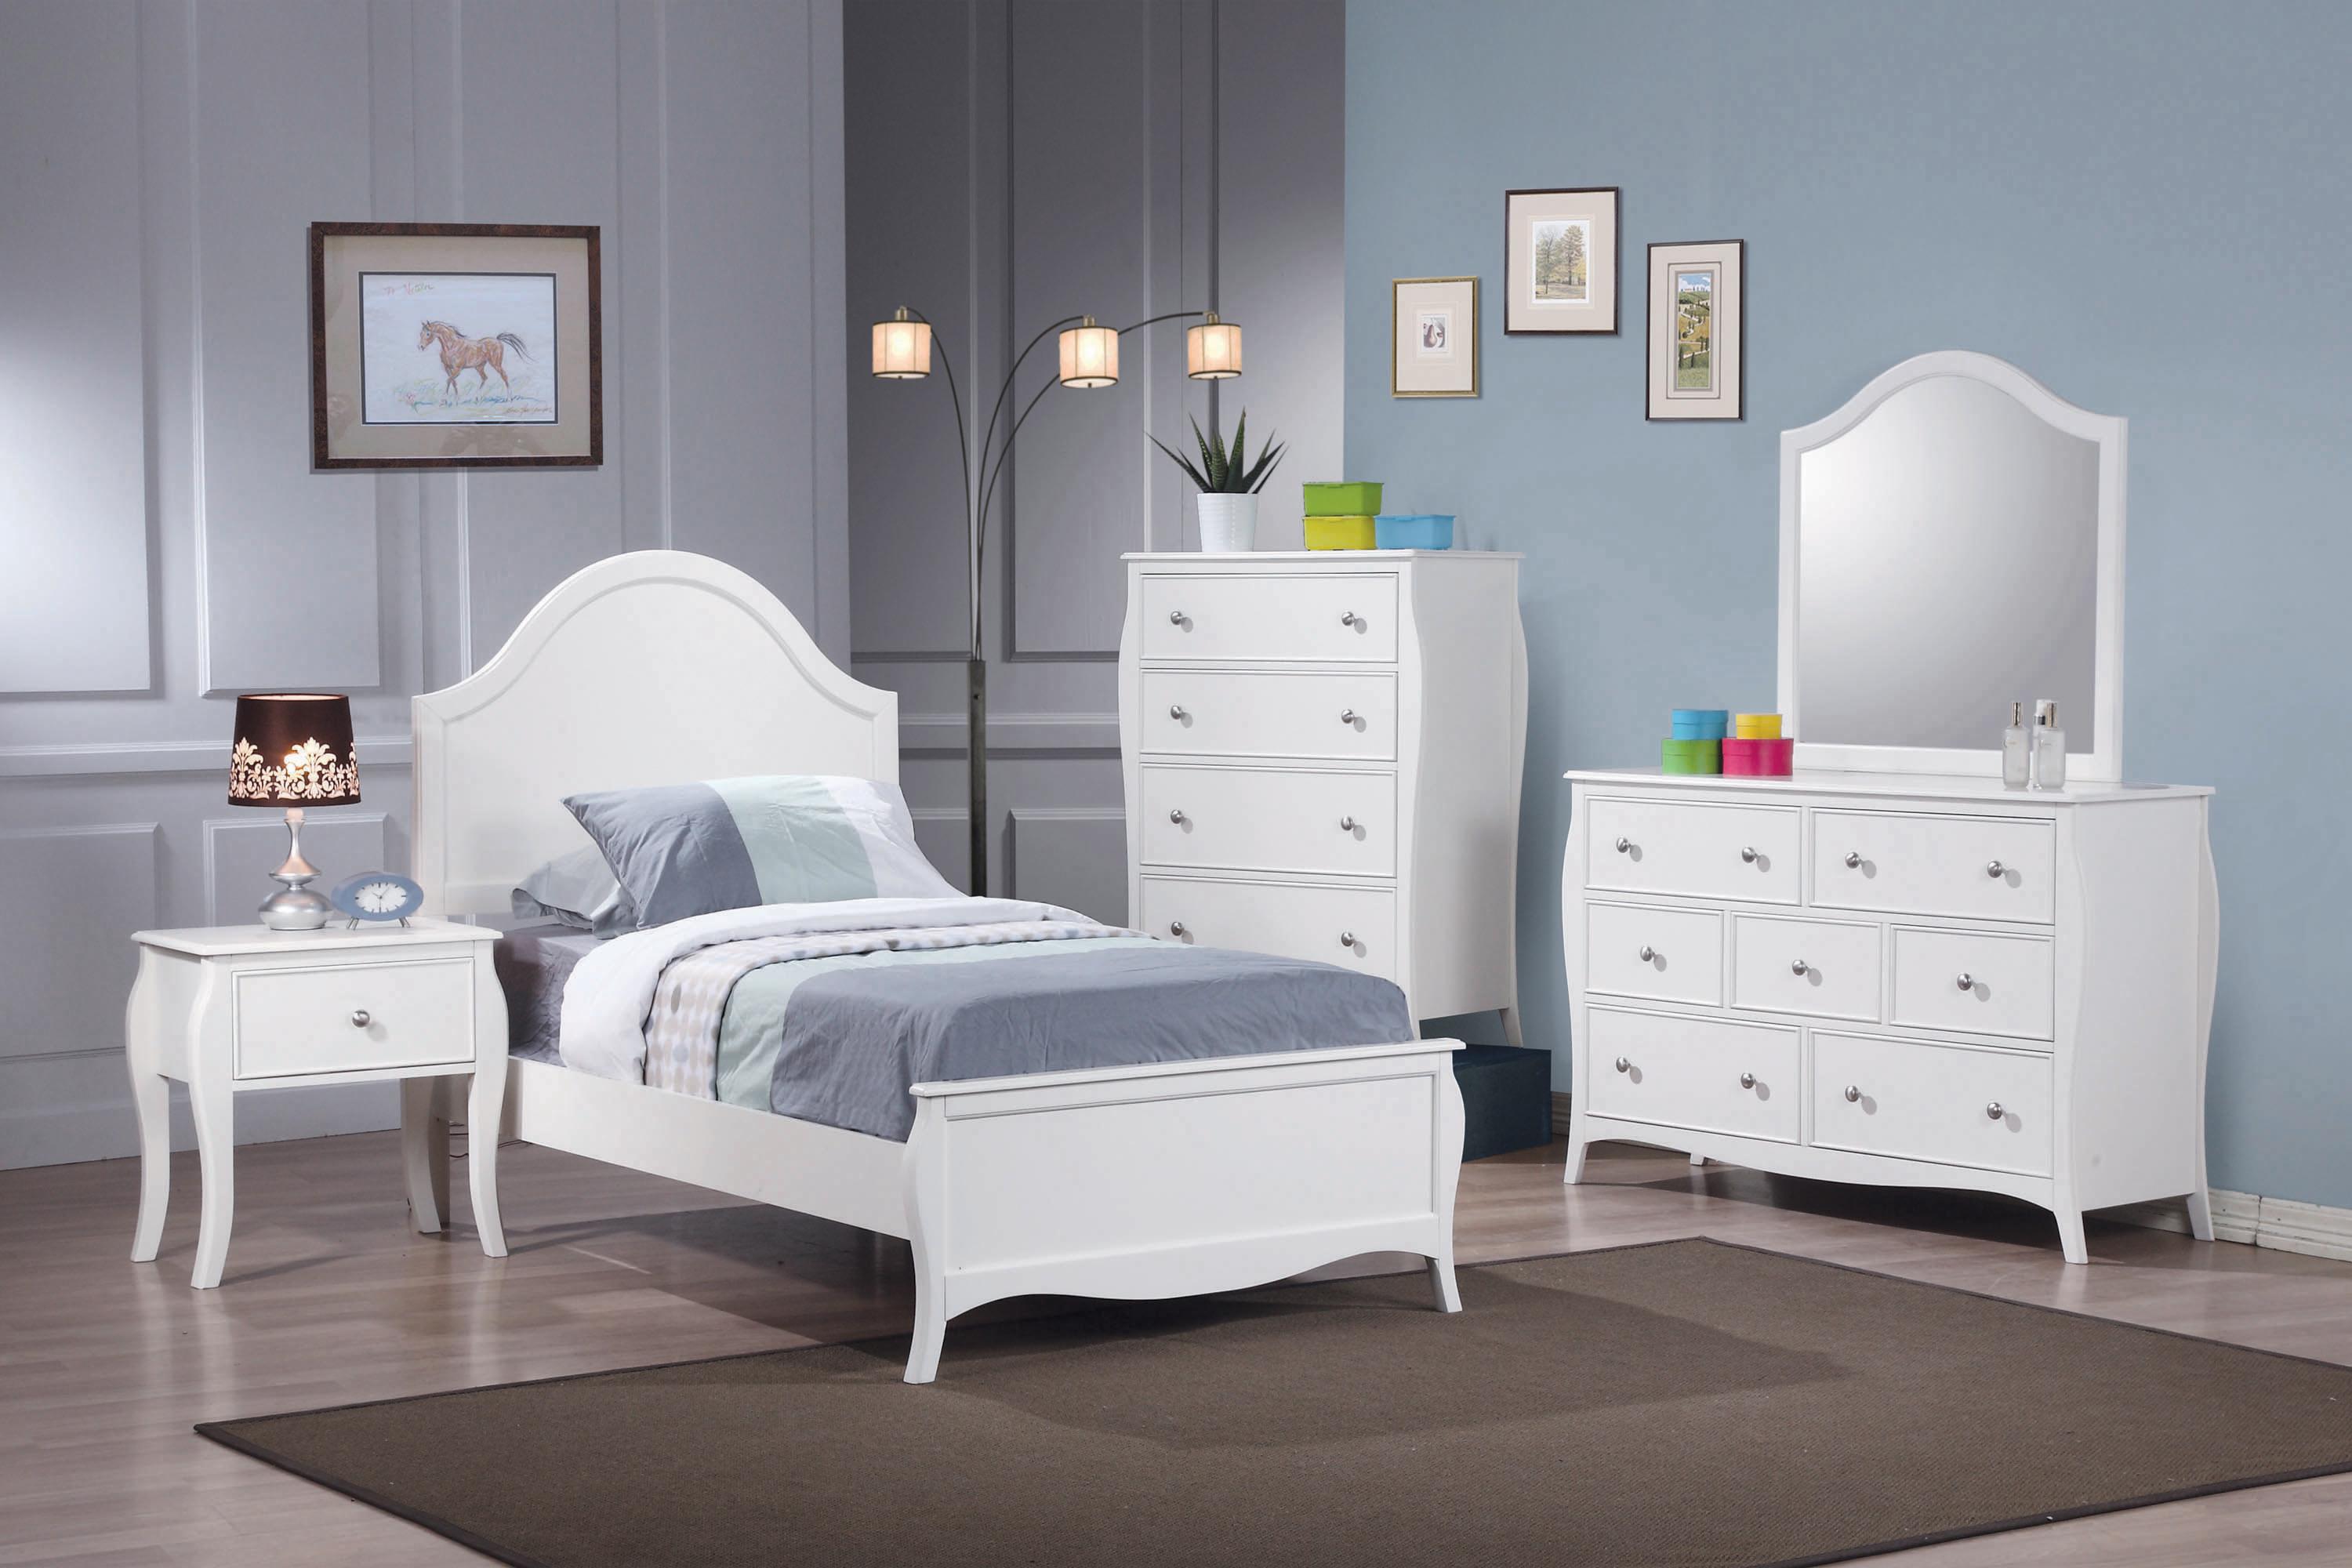 Traditional Bedroom Set 400561T-3PC Dominique 400561T-3PC in White 